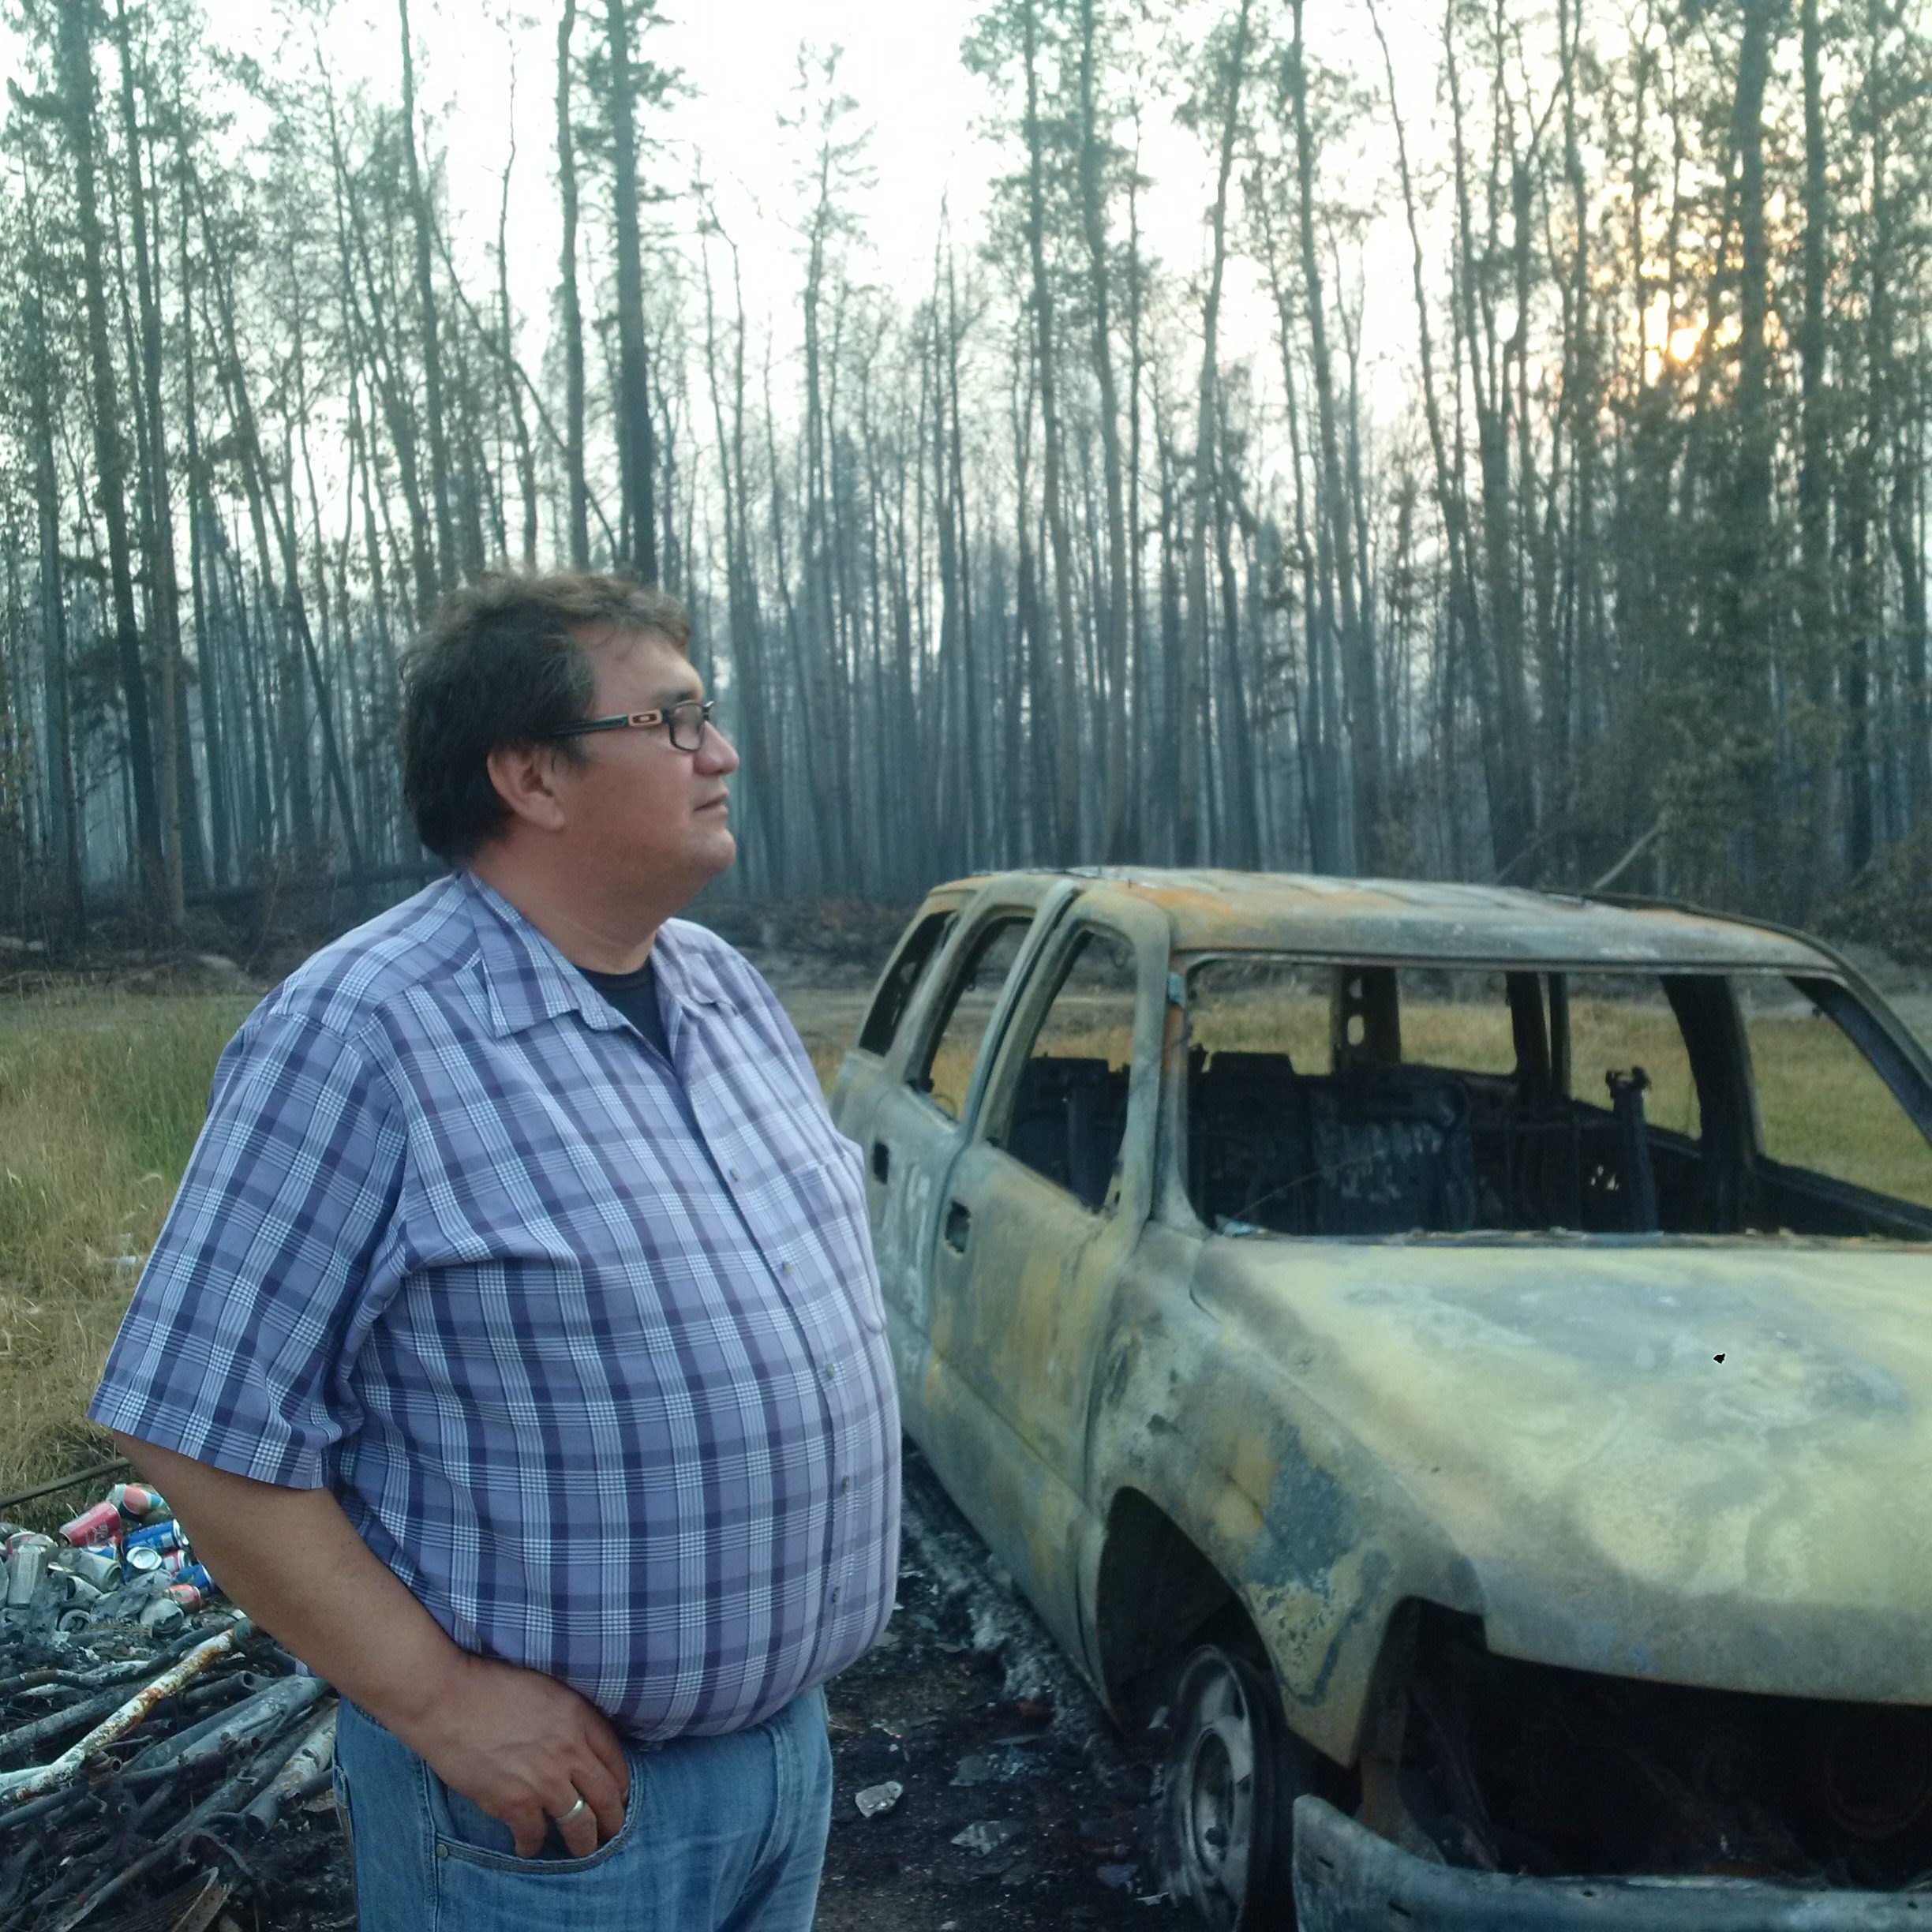 Montreal Lake Chief Edward Henderson stands beside the charred remains of a car in the backyard of a Montreal Lake home. (APTN/Photo)